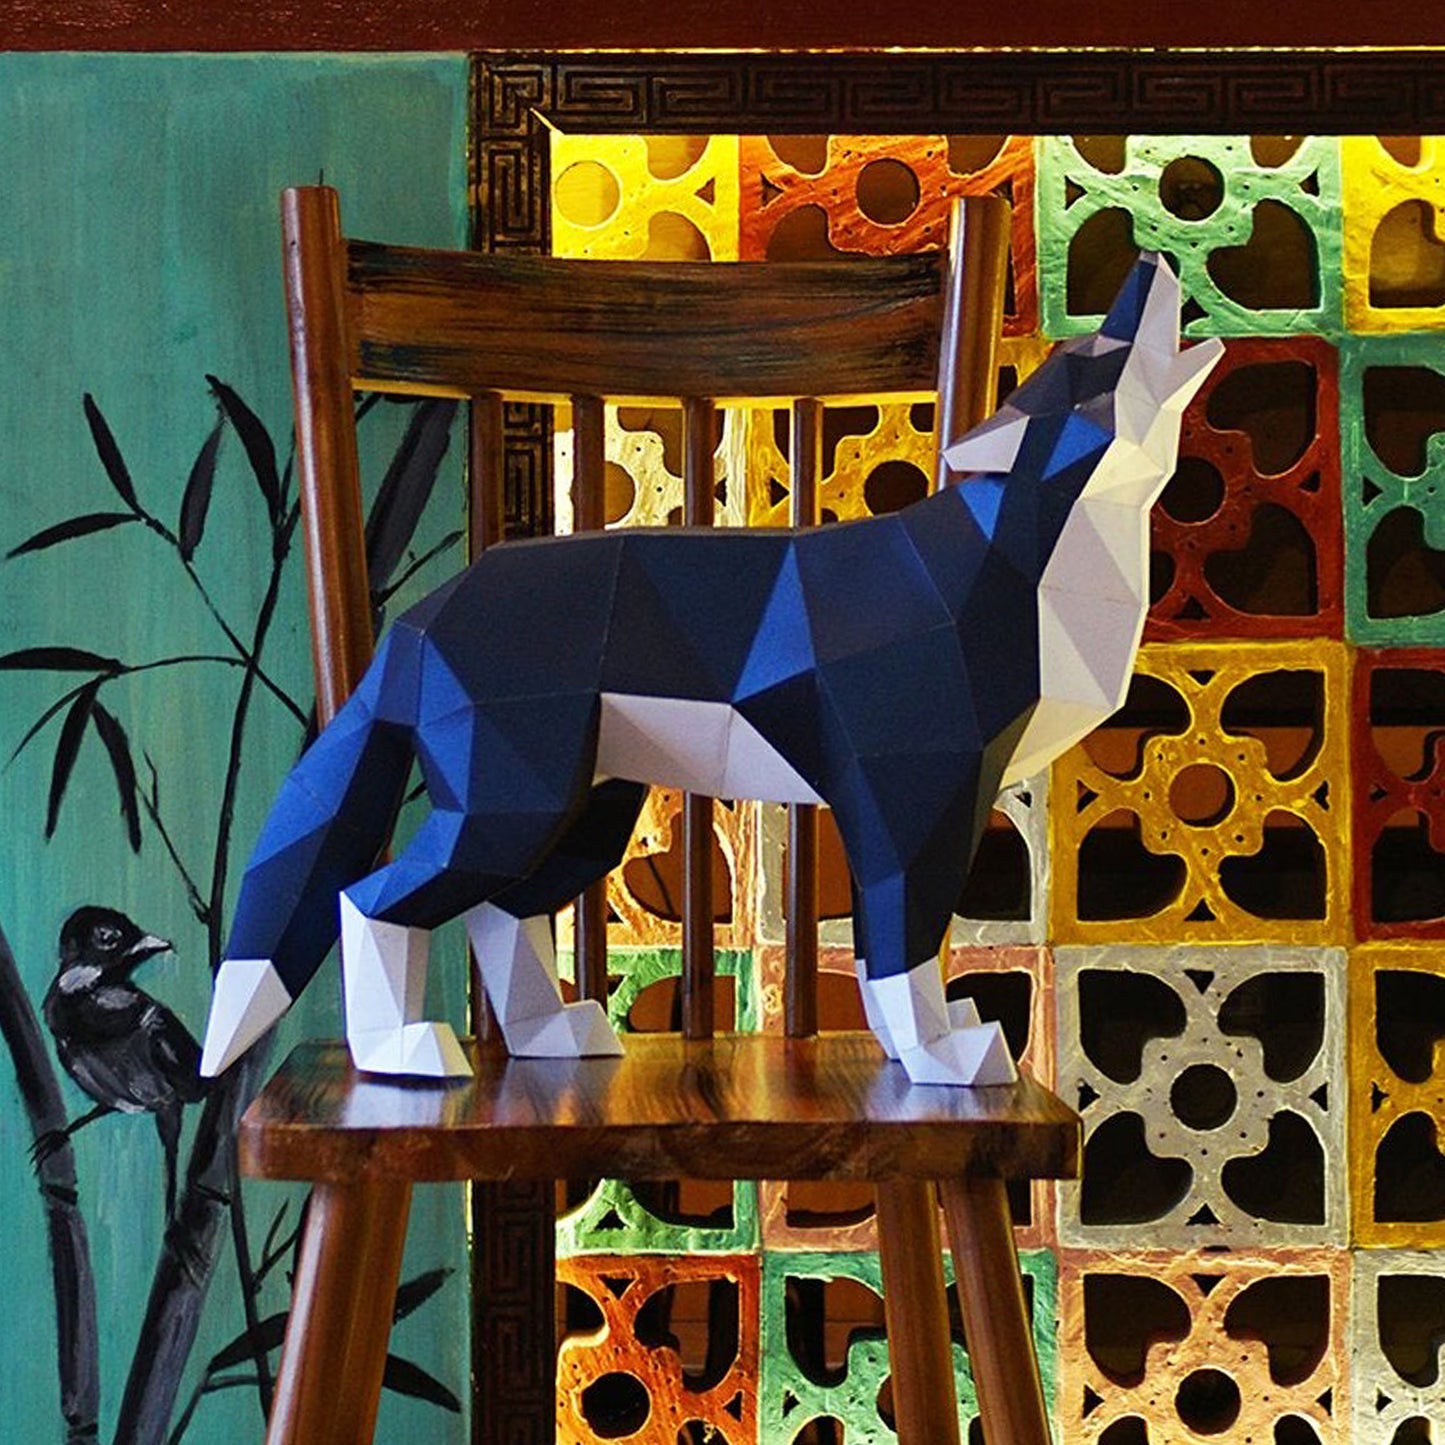 A blue and white paper model of a howling wolf, standing on a wooden stool. Behind the model is a multicolored wall with painted tree branches on one side.